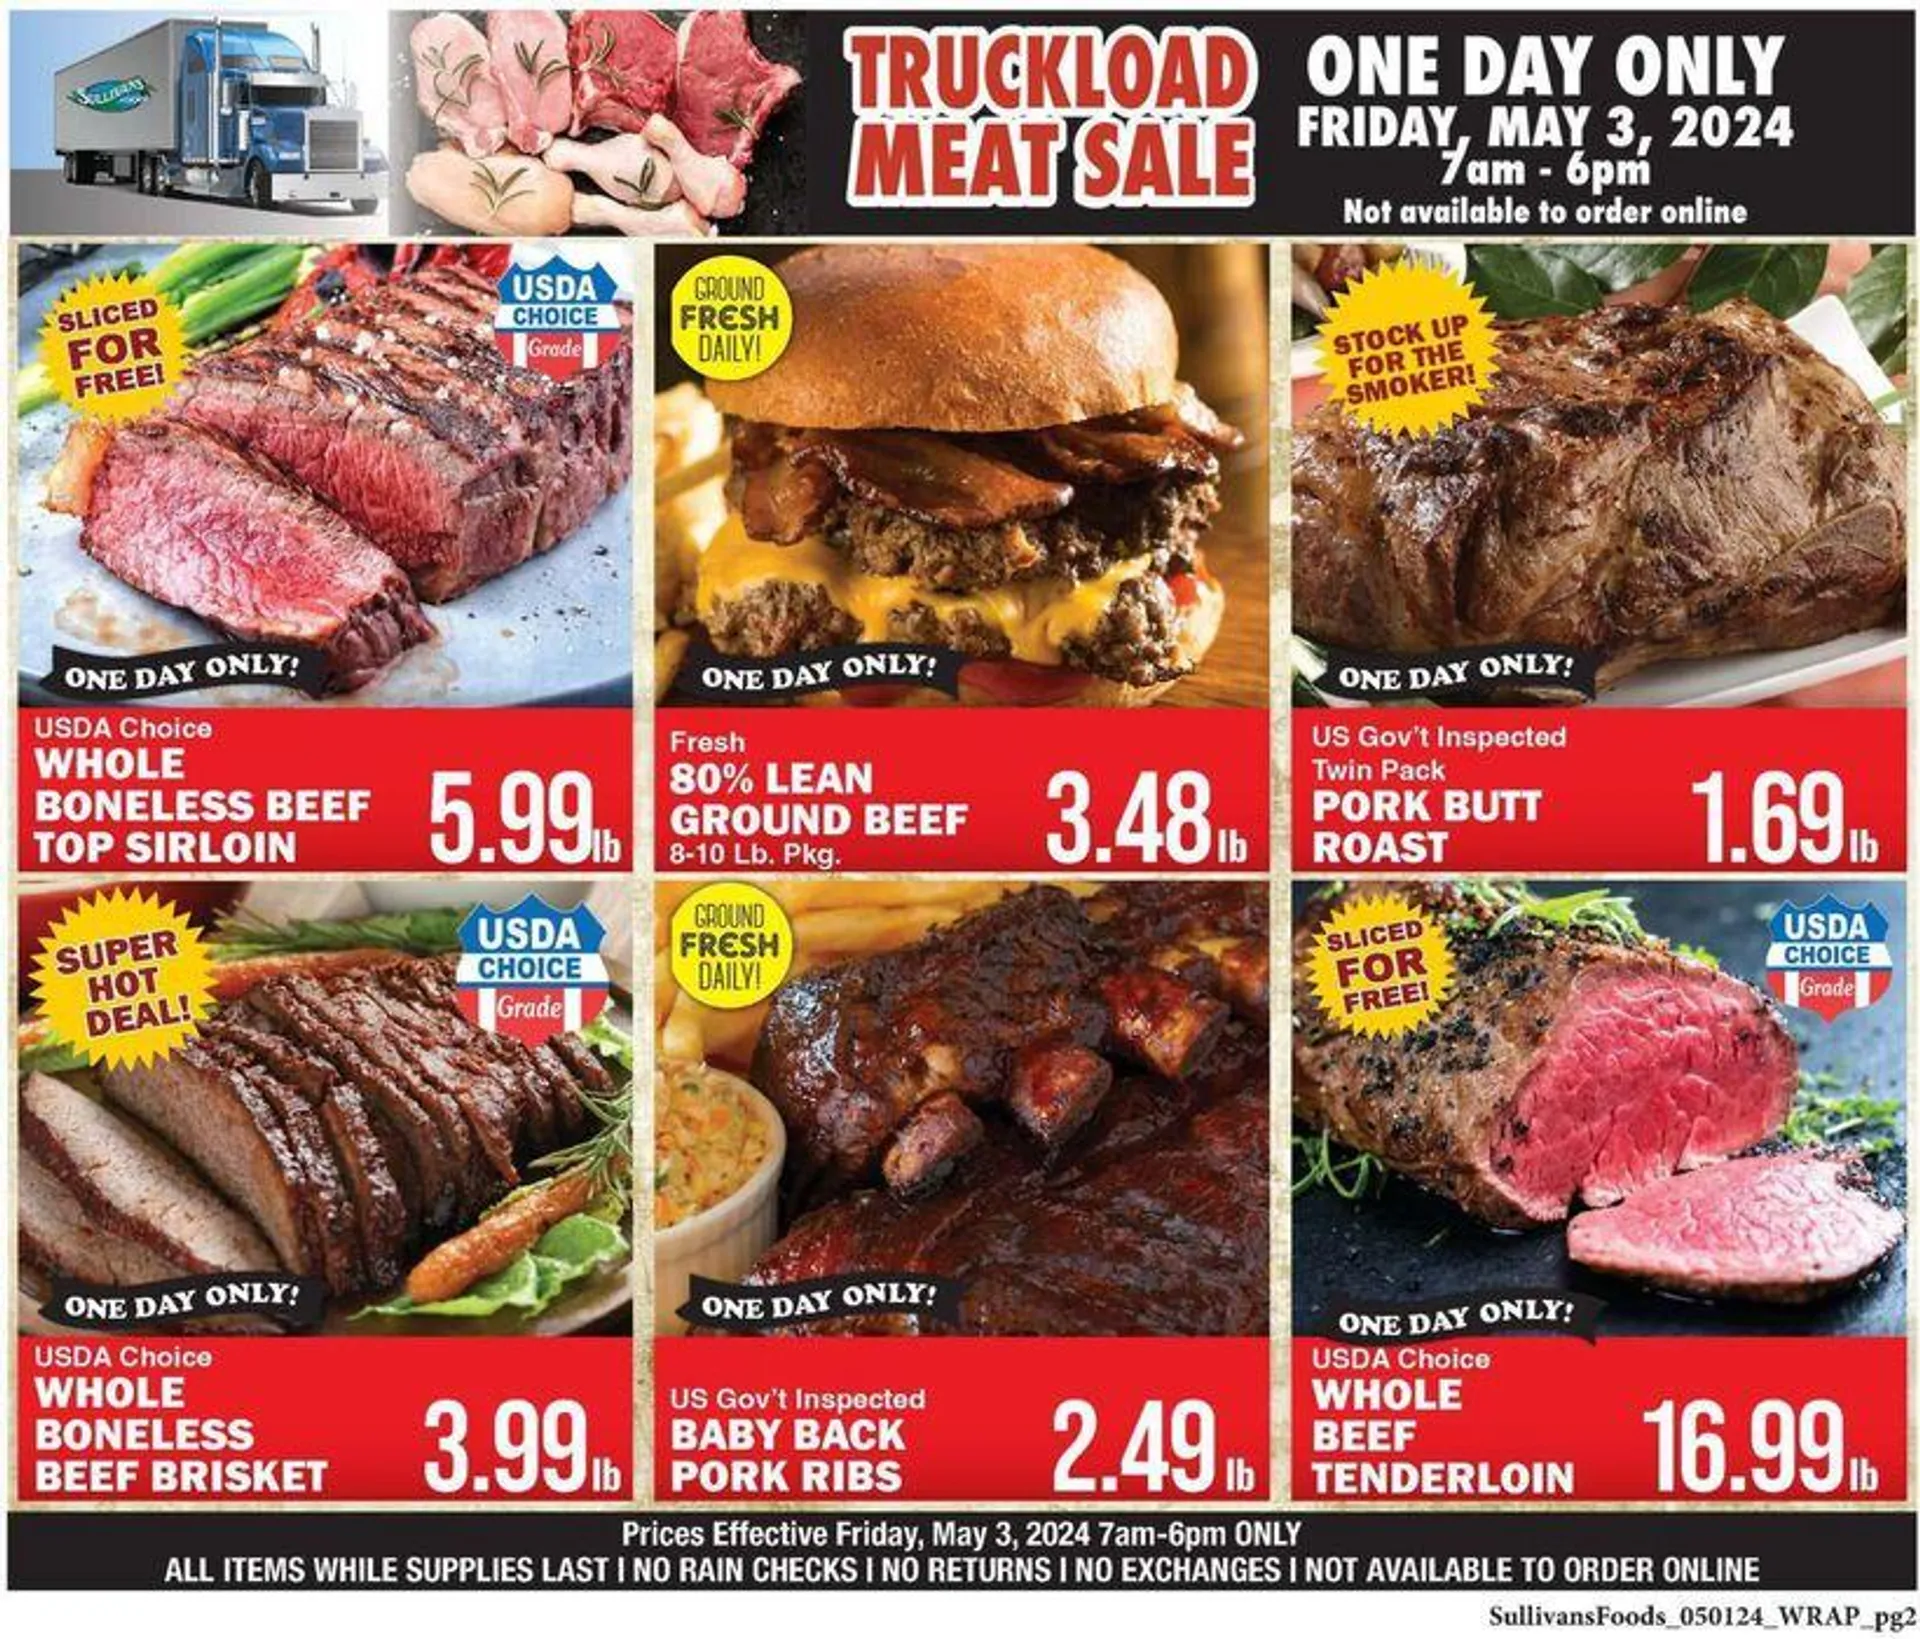 Truckload Meat Sale - 1